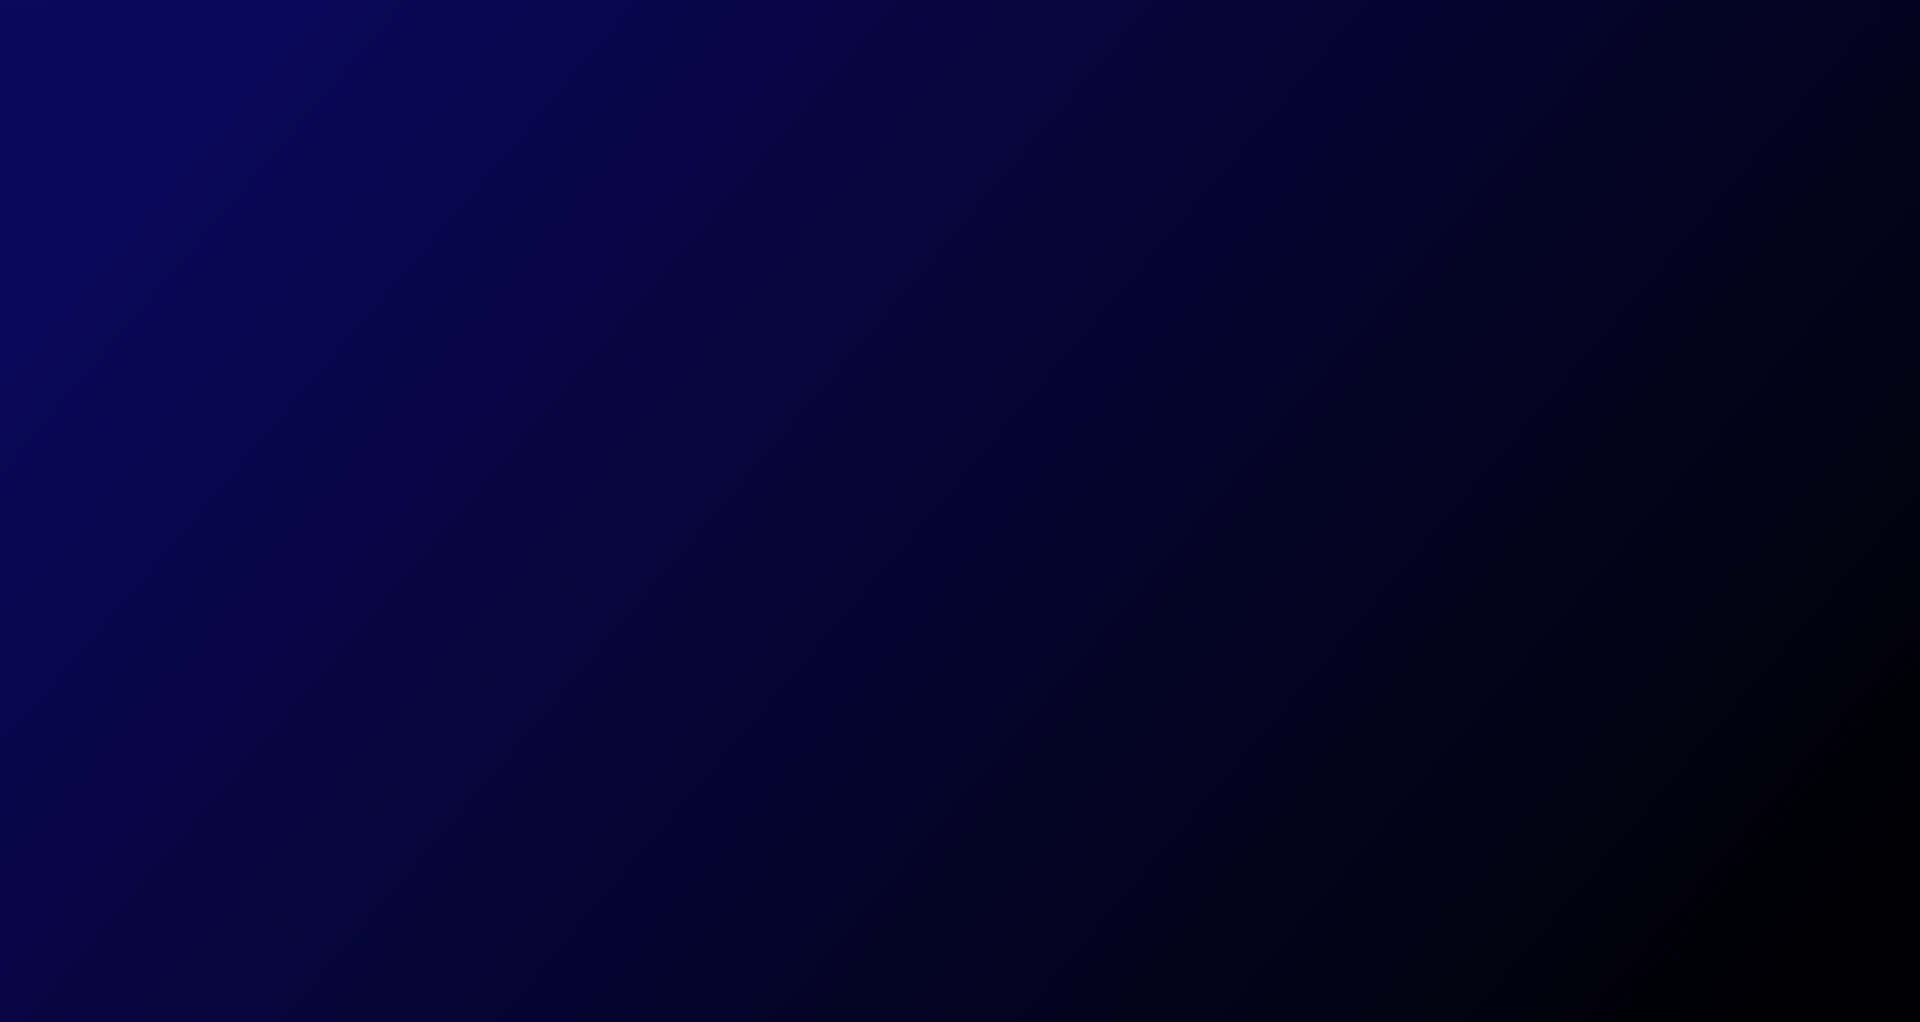 A vibrant blue and purple gradient background